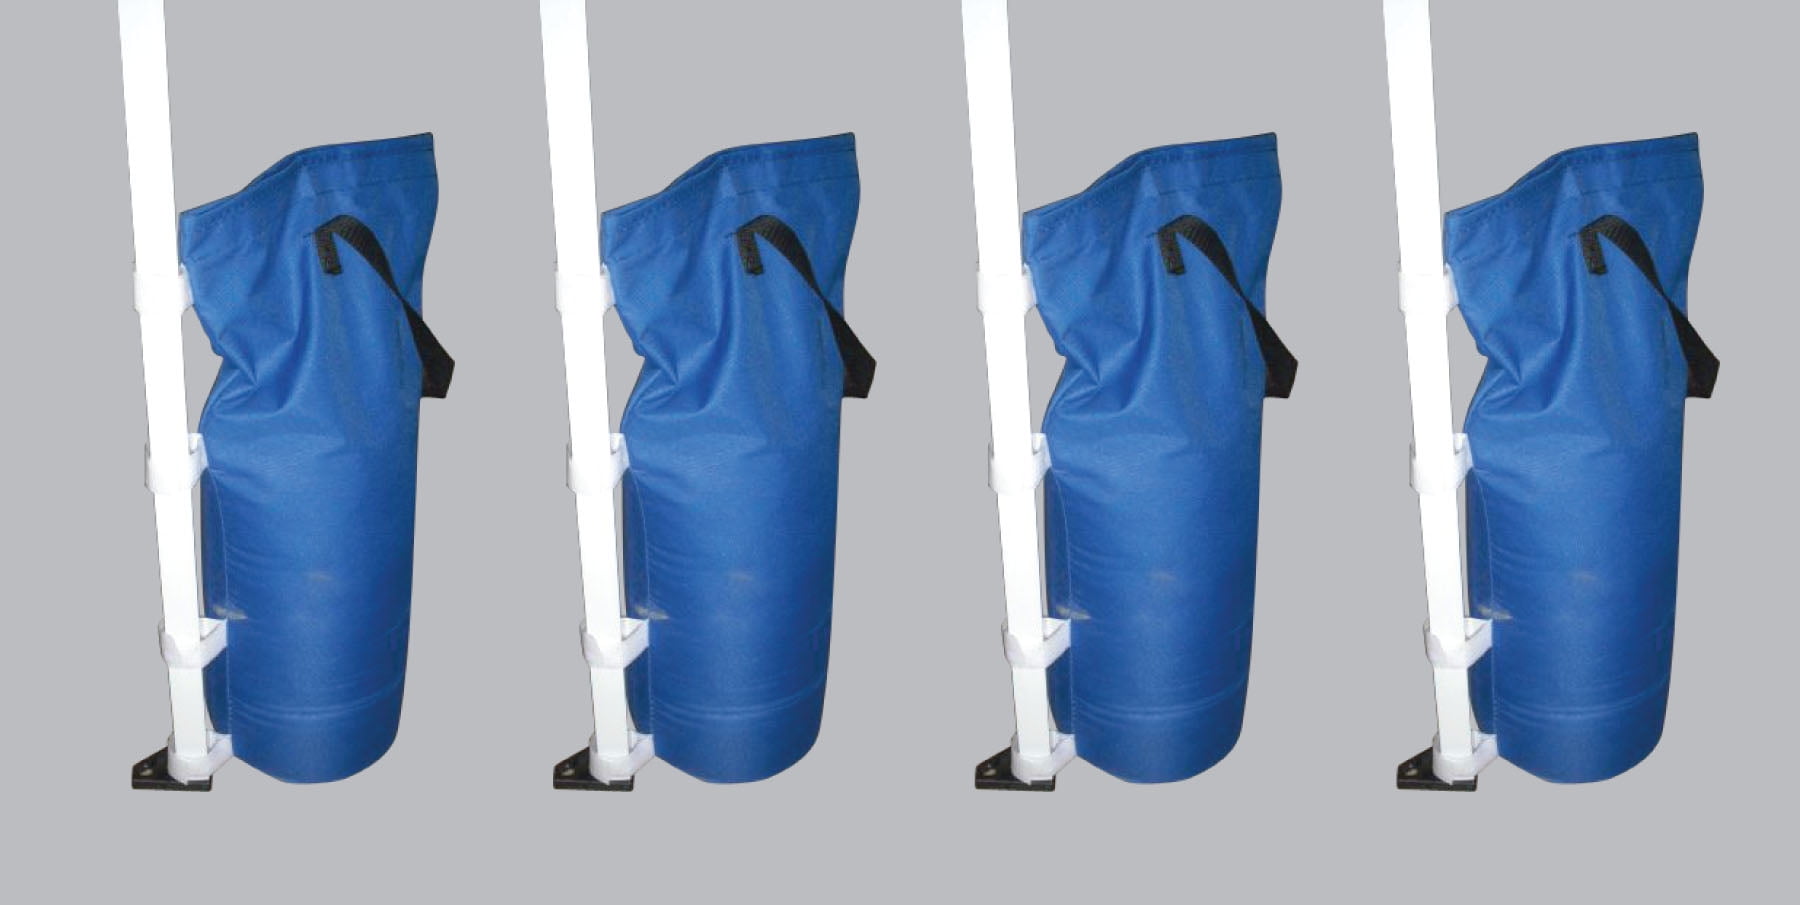 BESPORTBLE Canopy Weights Bag Tent Sand Bag Leg Weight Oxford Cloth Hook and Loop Waterproof for Outdoor Pop Up Canopy Tent Gazebo Shelter 